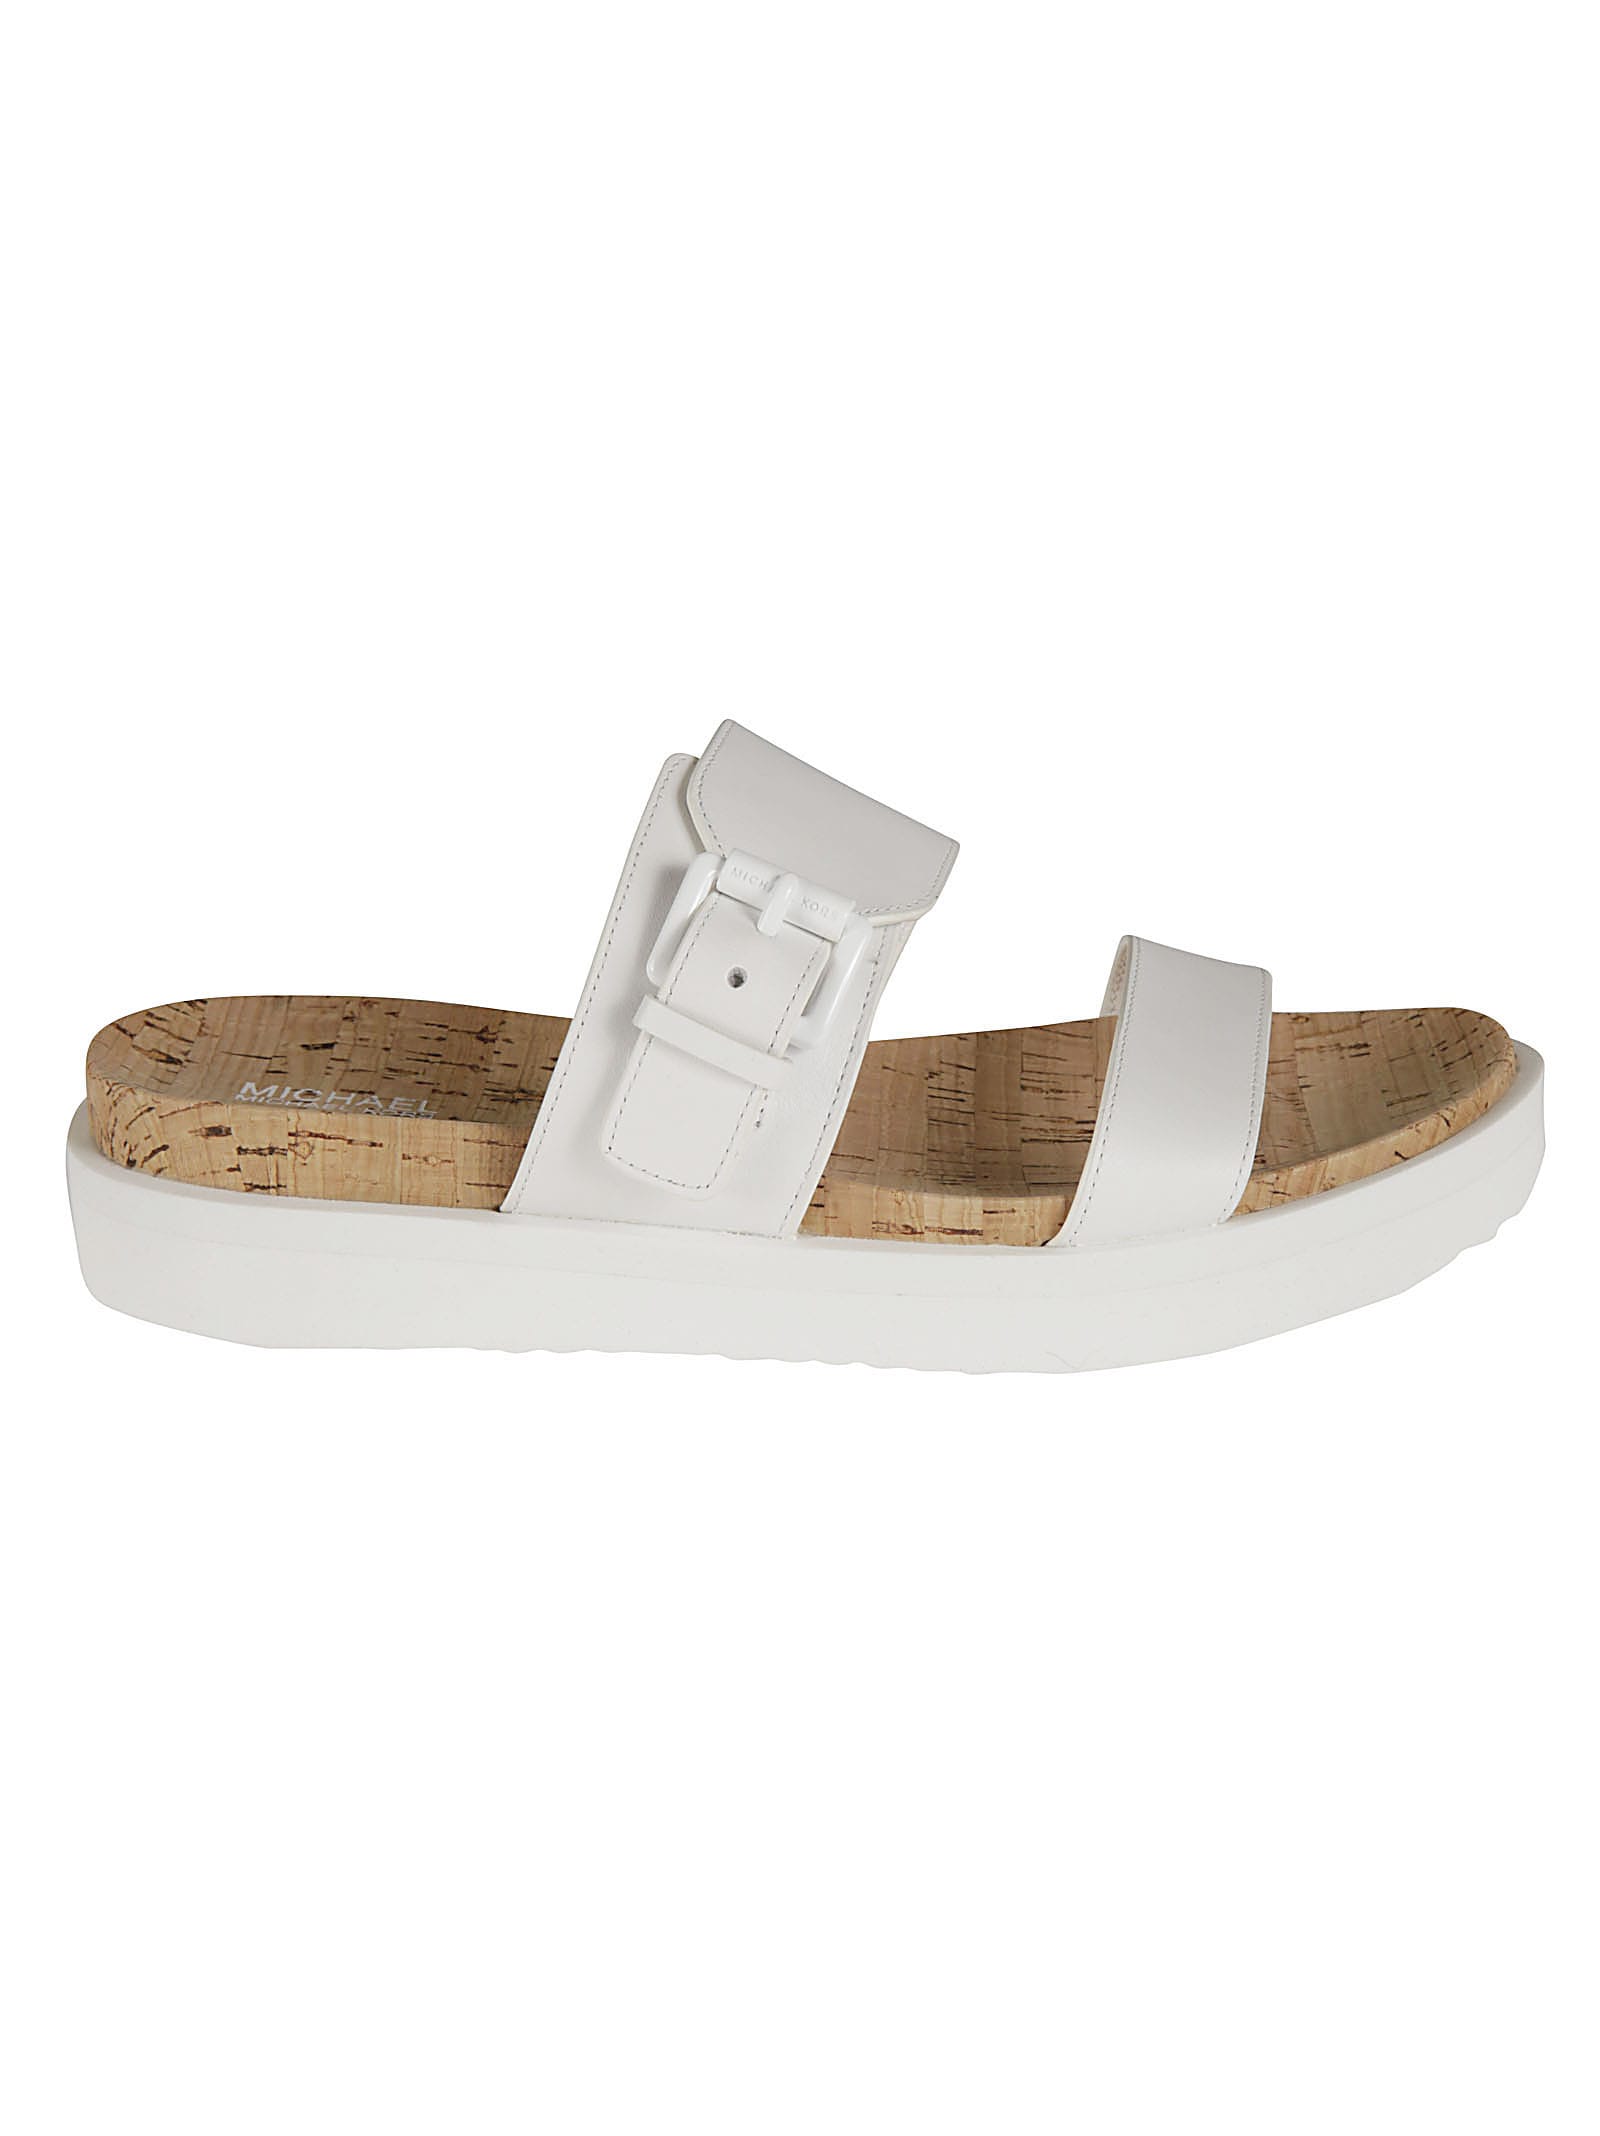 Buy Michael Kors Bo Sliders online, shop Michael Kors shoes with free shipping